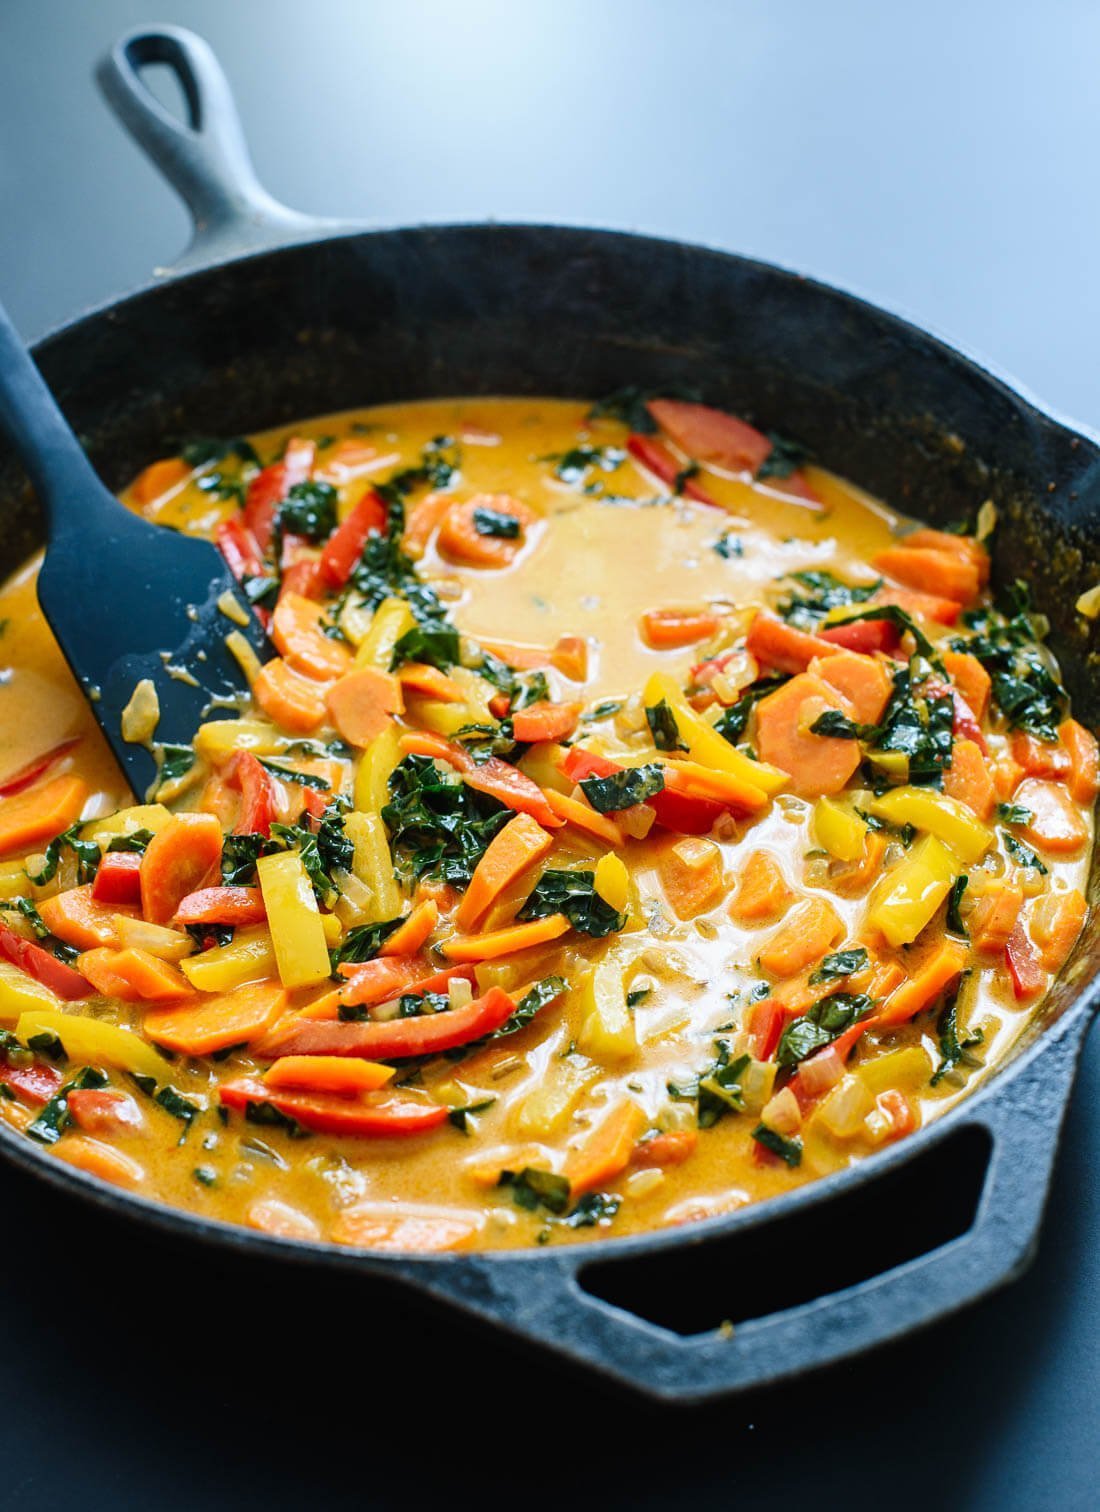 Thai red curry with vegetables - Groove Rabbit